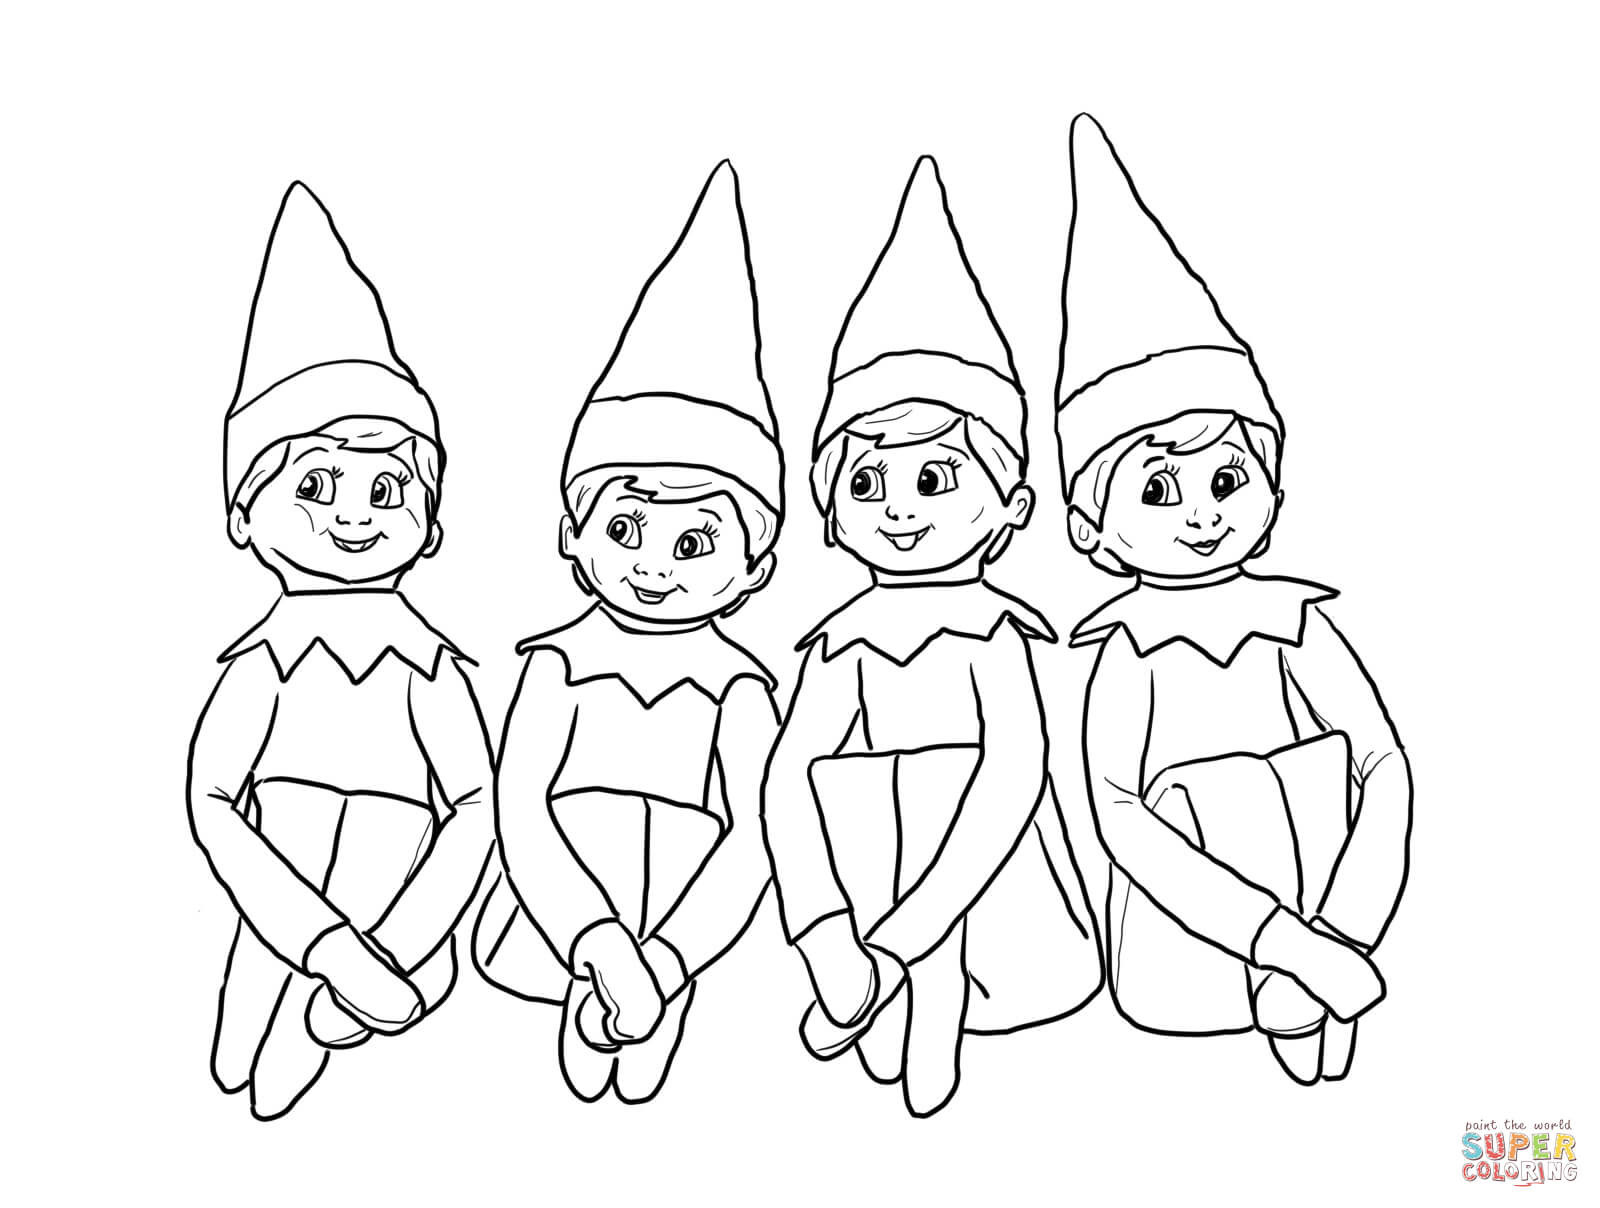 Elf Coloring Pages Printable
 Elves on the Shelf coloring page